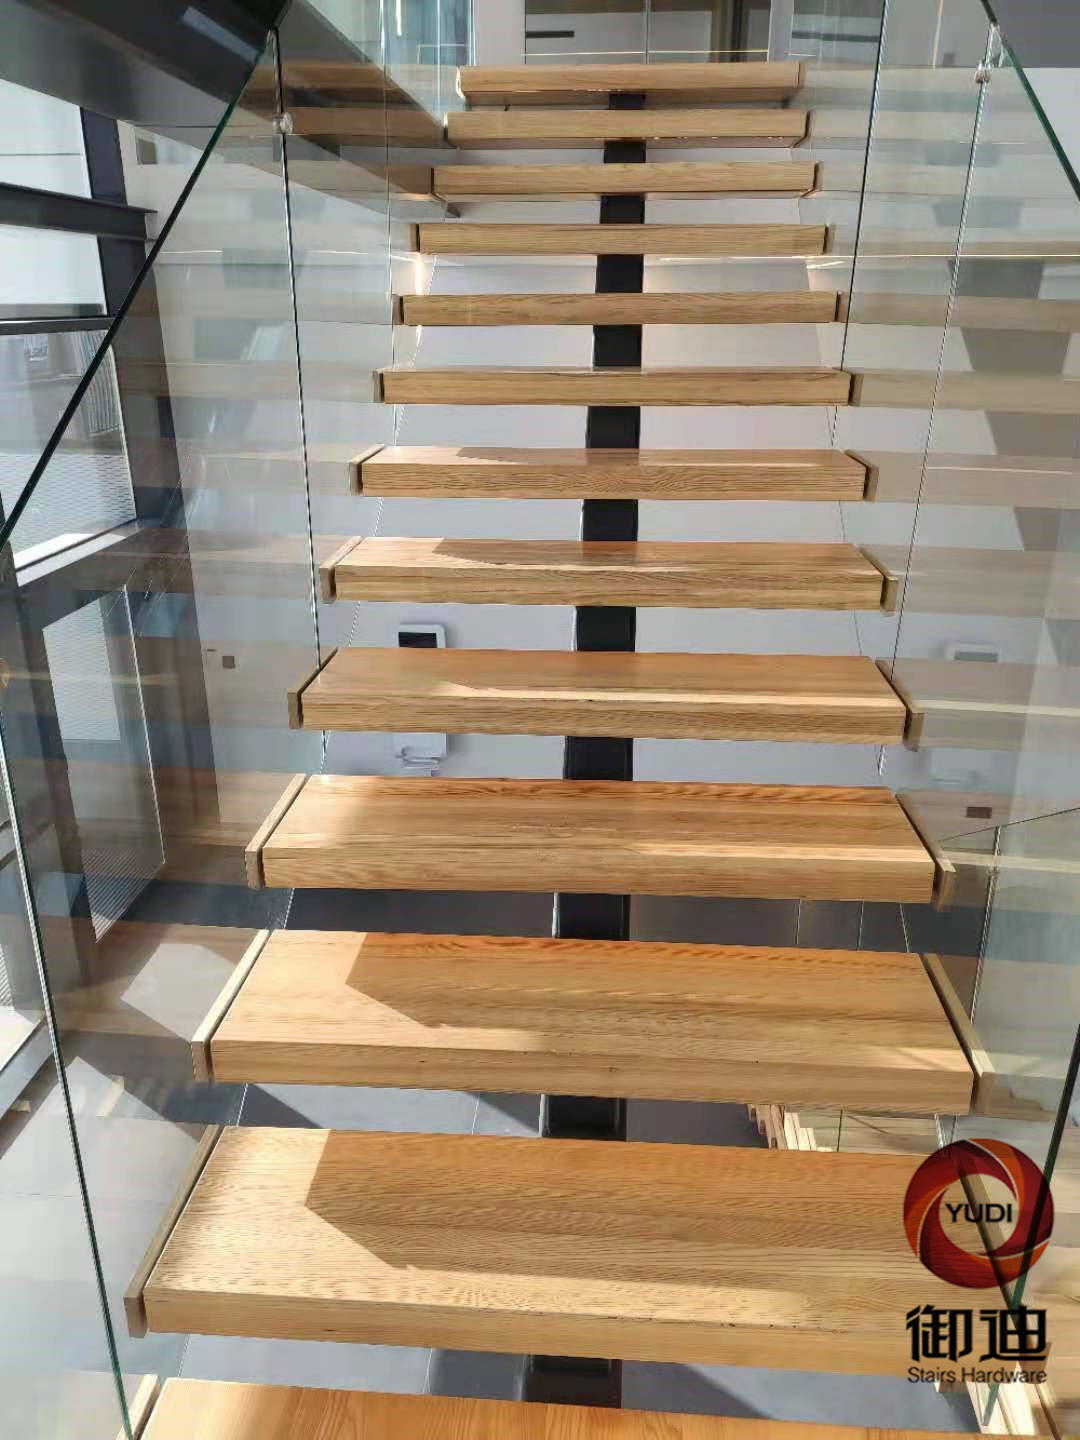 YUDI Stairs internal stairs suppliers for residential